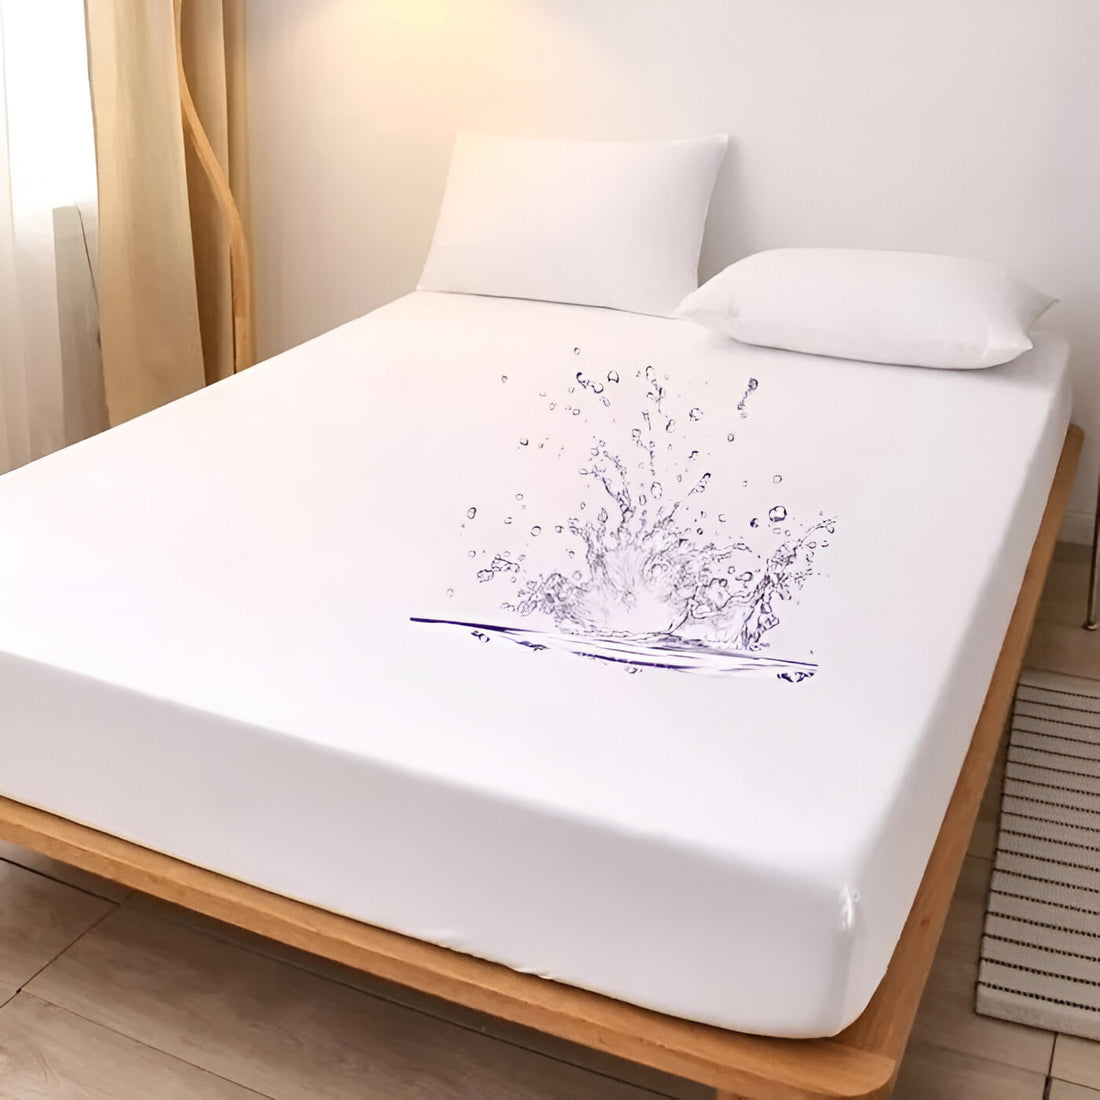 King Size Waterproof Mattress Cover | Premium Protection for Your Bed